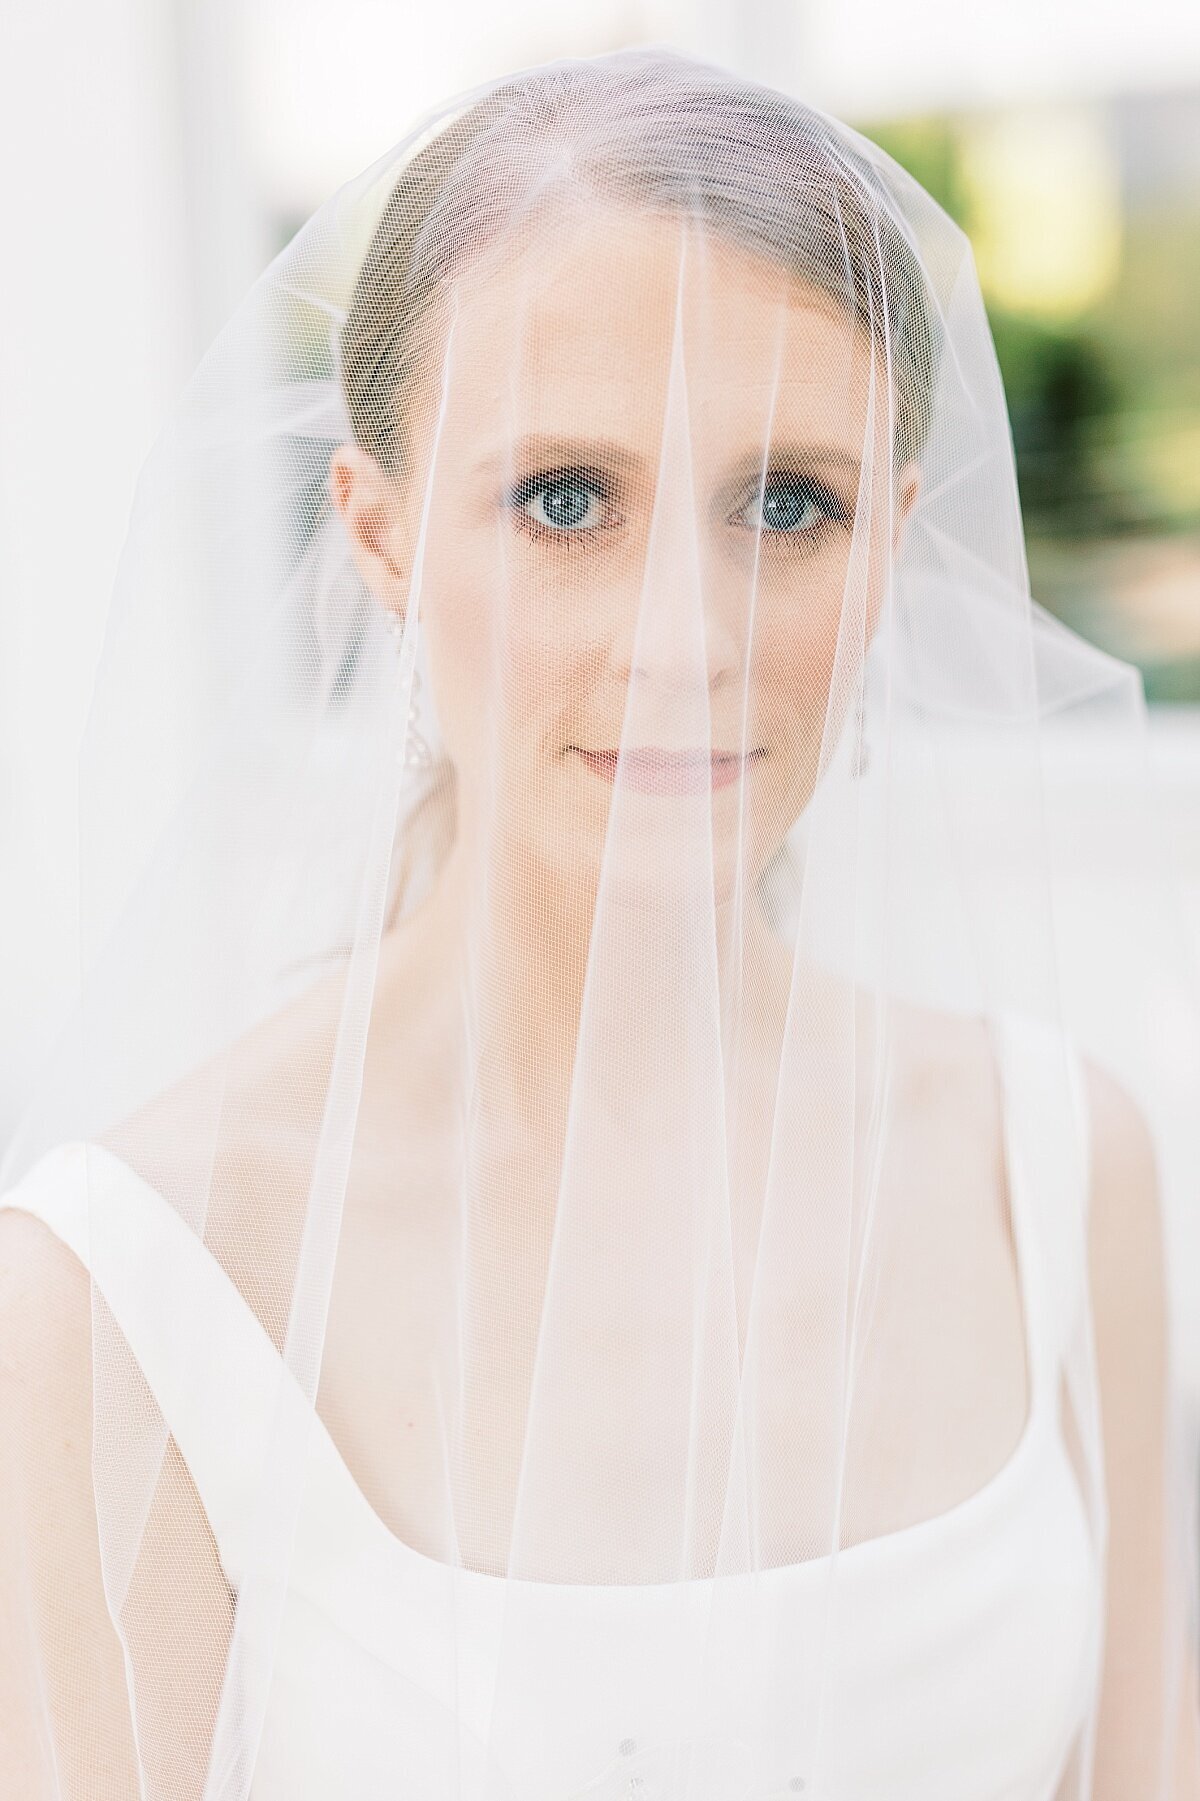 rebecca shivers photography lancaster wedding photographer pa wedding harrisburg wedding photographer bright and airy linwood estate